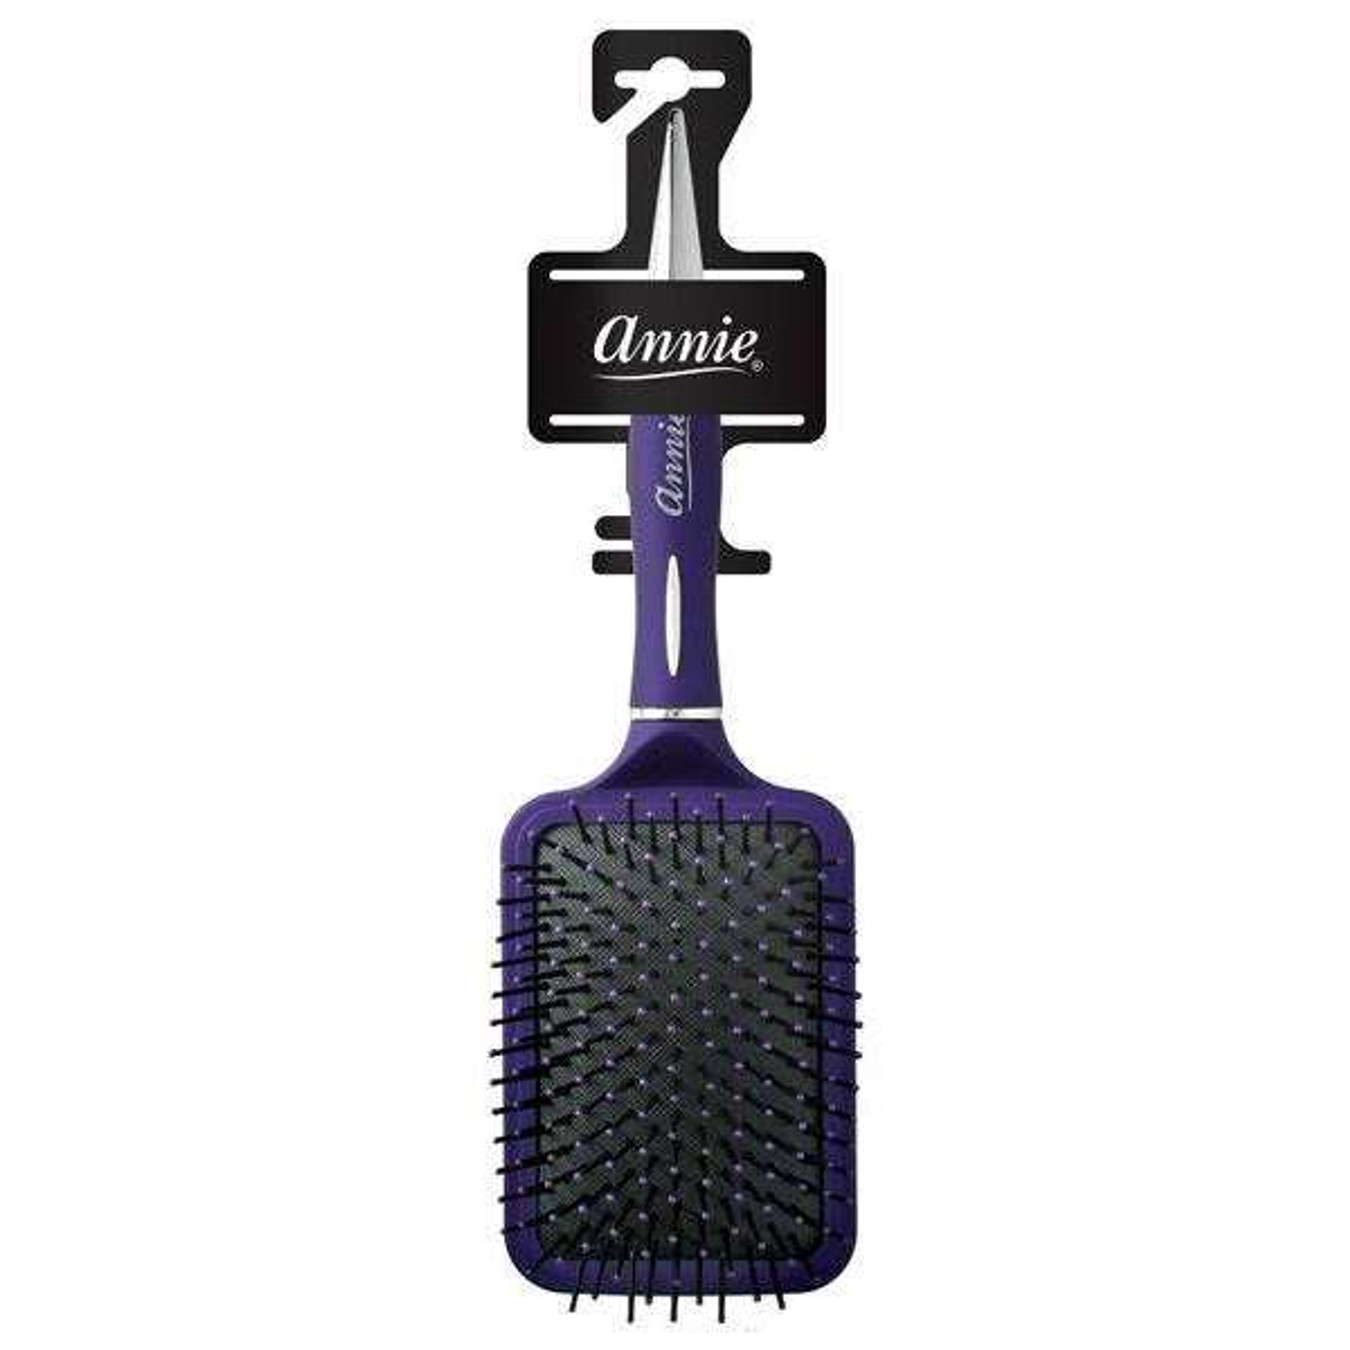 Annie Section Tip Rubberized Purple Cushion Brush